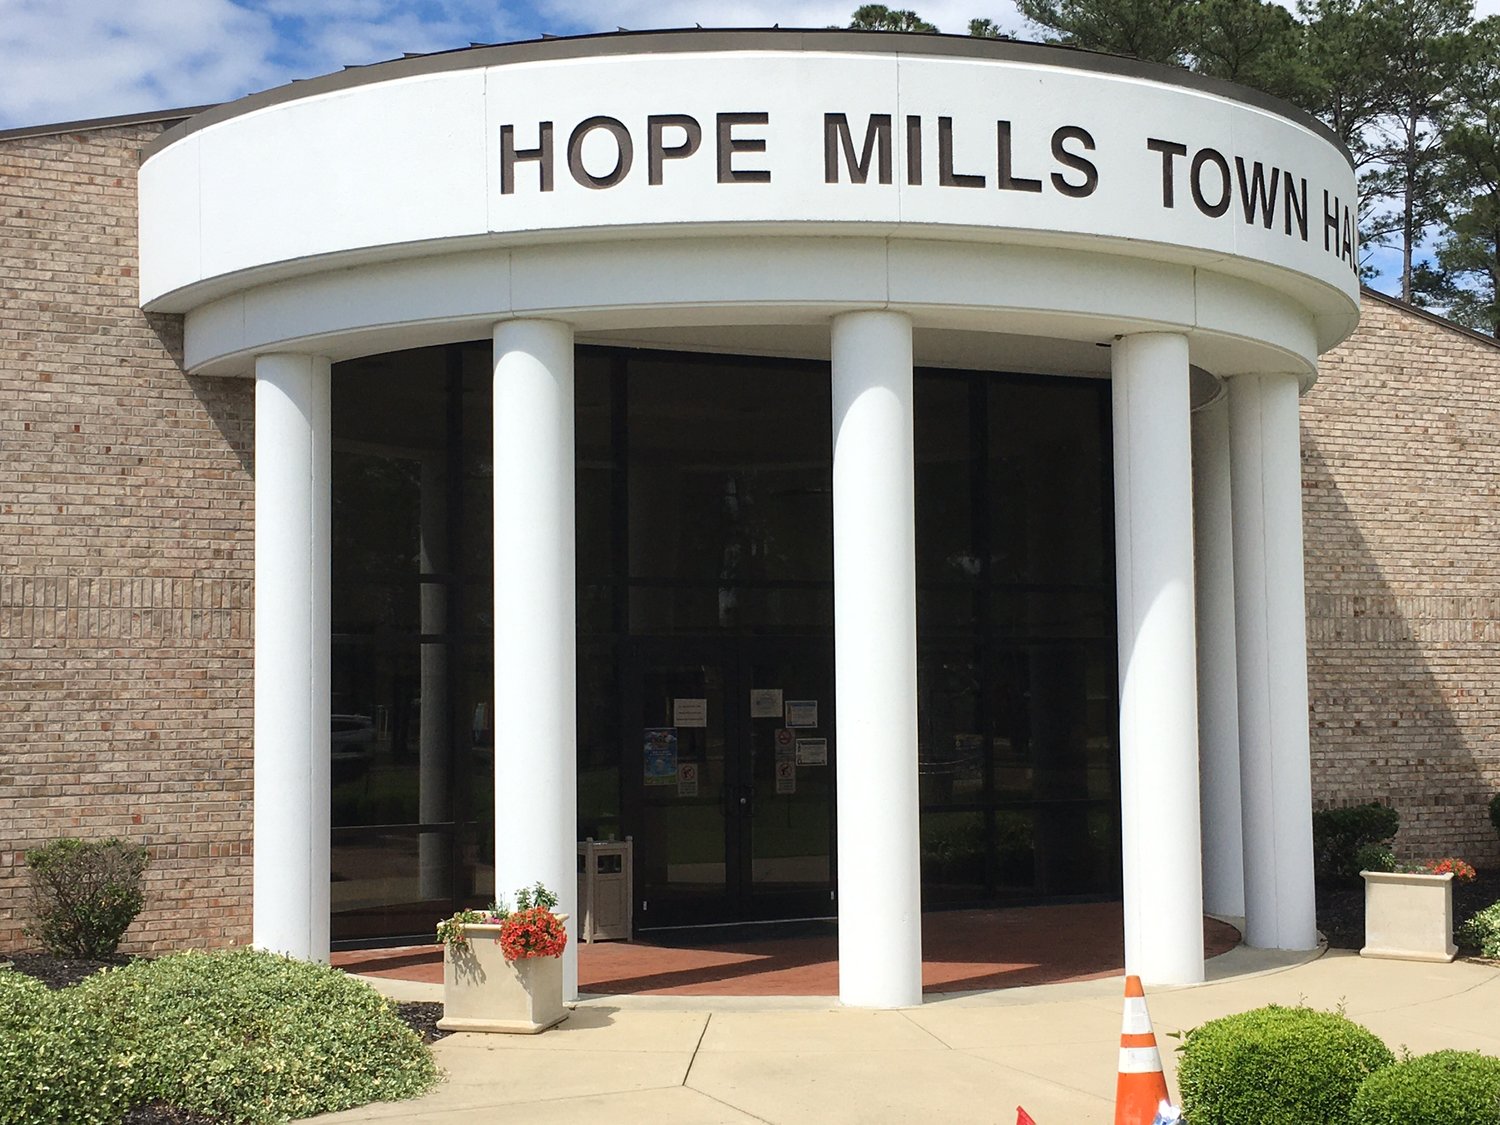 The Hope Mills Board of Commissioners on Monday will consider placing a temporary moratorium on particular types of businesses while staff members work to establish an overlay zoning district to help guide development in the town.